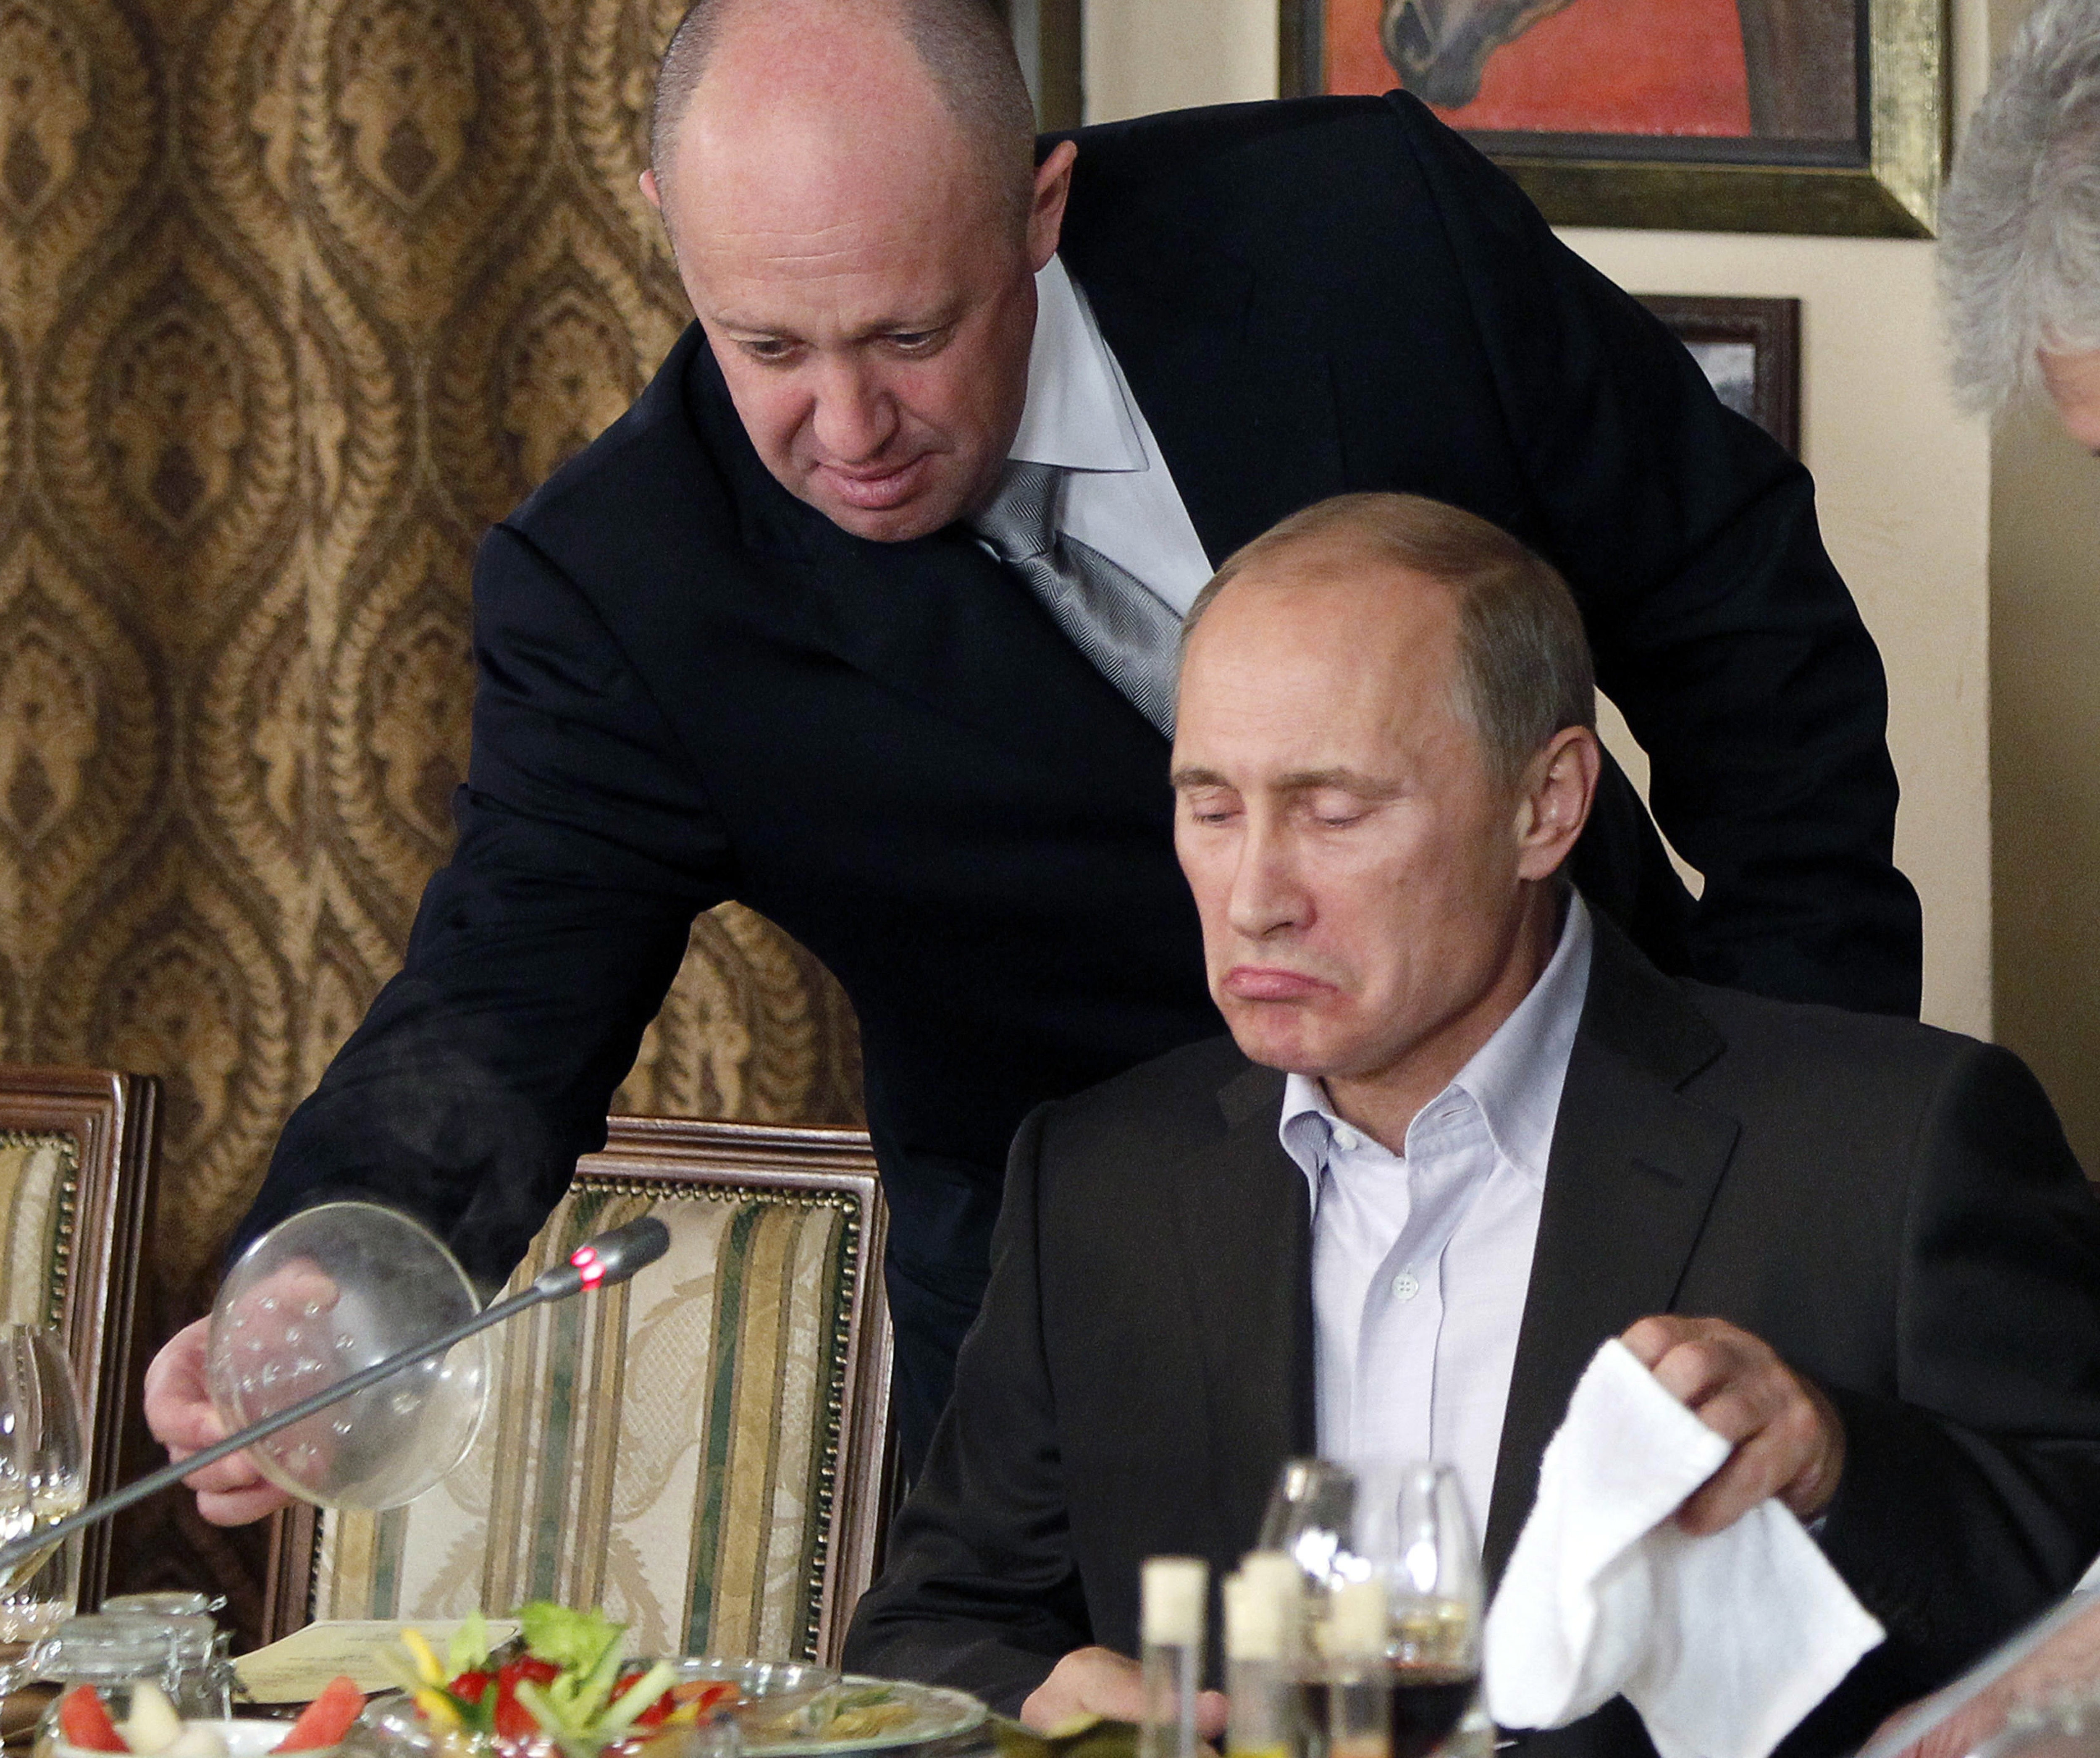 FILE Yevgeny Prigozhin, top, serves food to then-Russian Prime Minister Vladimir Putin at Prigozhin's restaurant outside Moscow, Russia on Nov. 11, 2011. Prigozhin, the owner of the Wagner private military contractor who called for an armed rebellion aimed at ousting Russia's defense minister has confirmed in a video that he and his troops have reached Rostov-on-Don. 